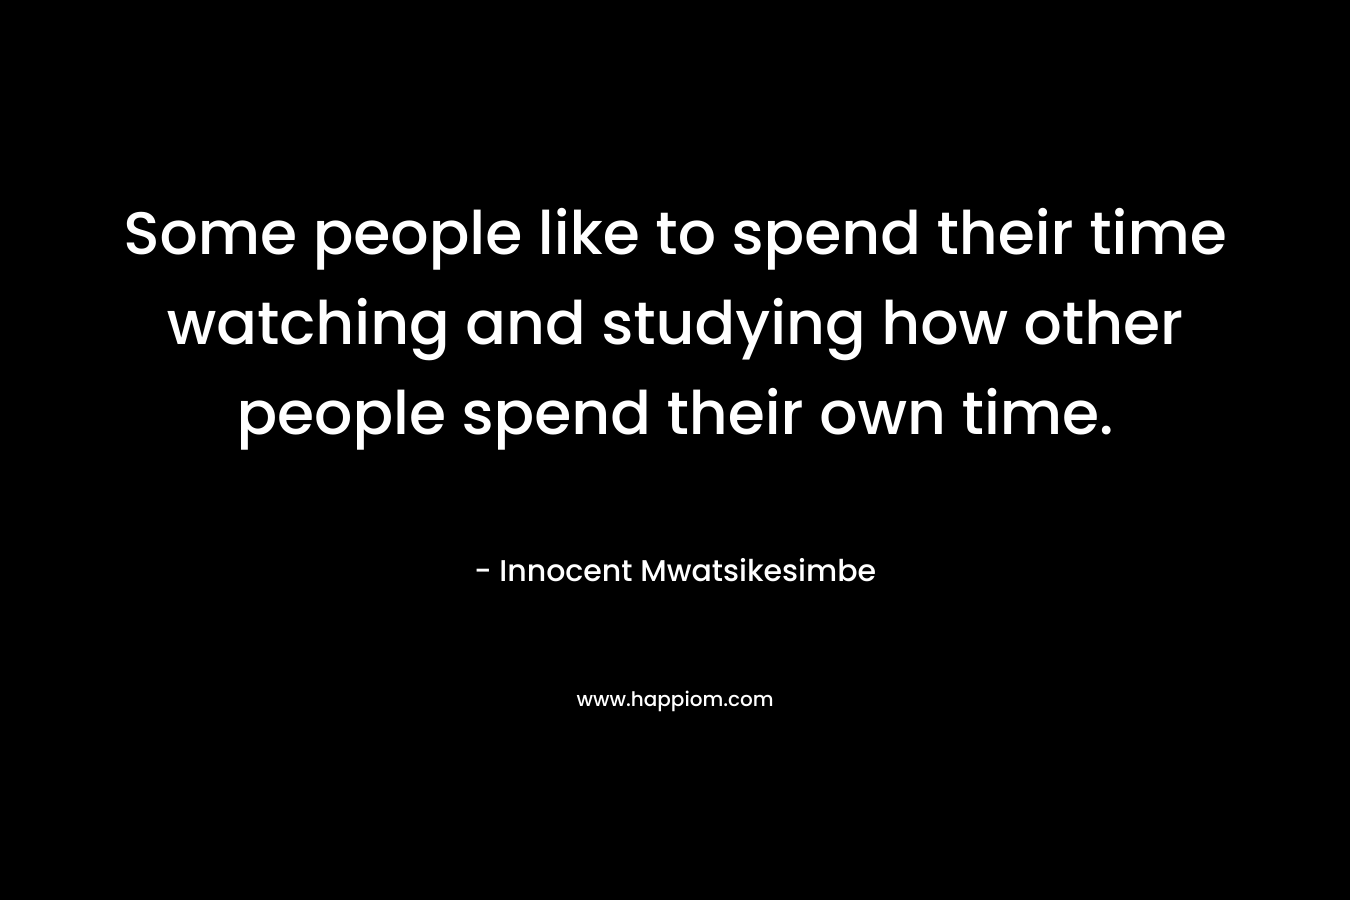 Some people like to spend their time watching and studying how other people spend their own time.